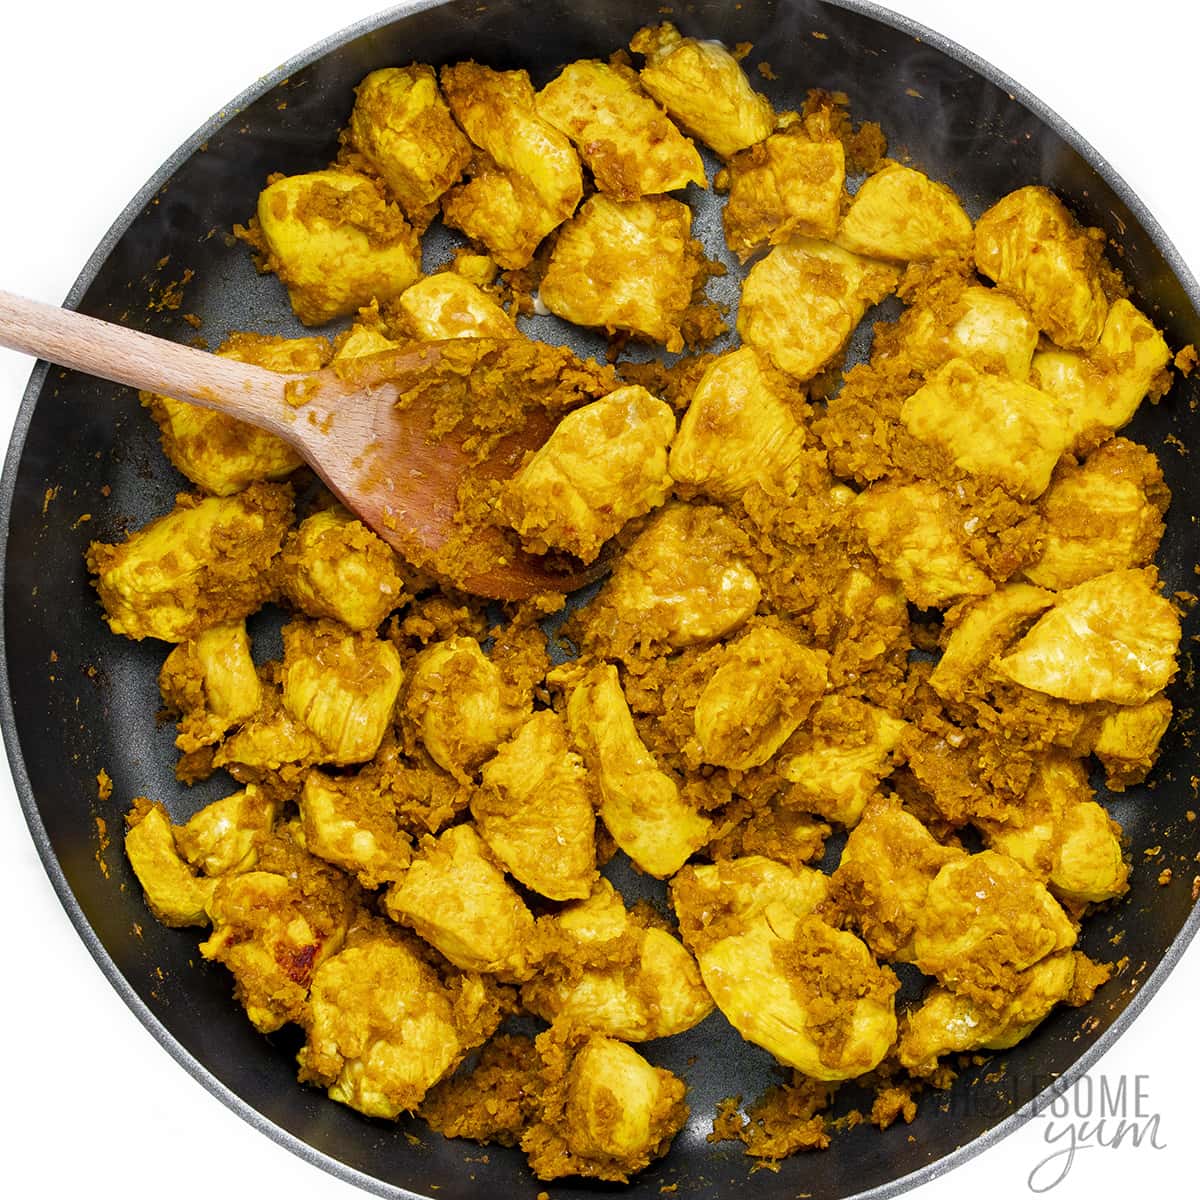 Spice paste with chicken in skillet.